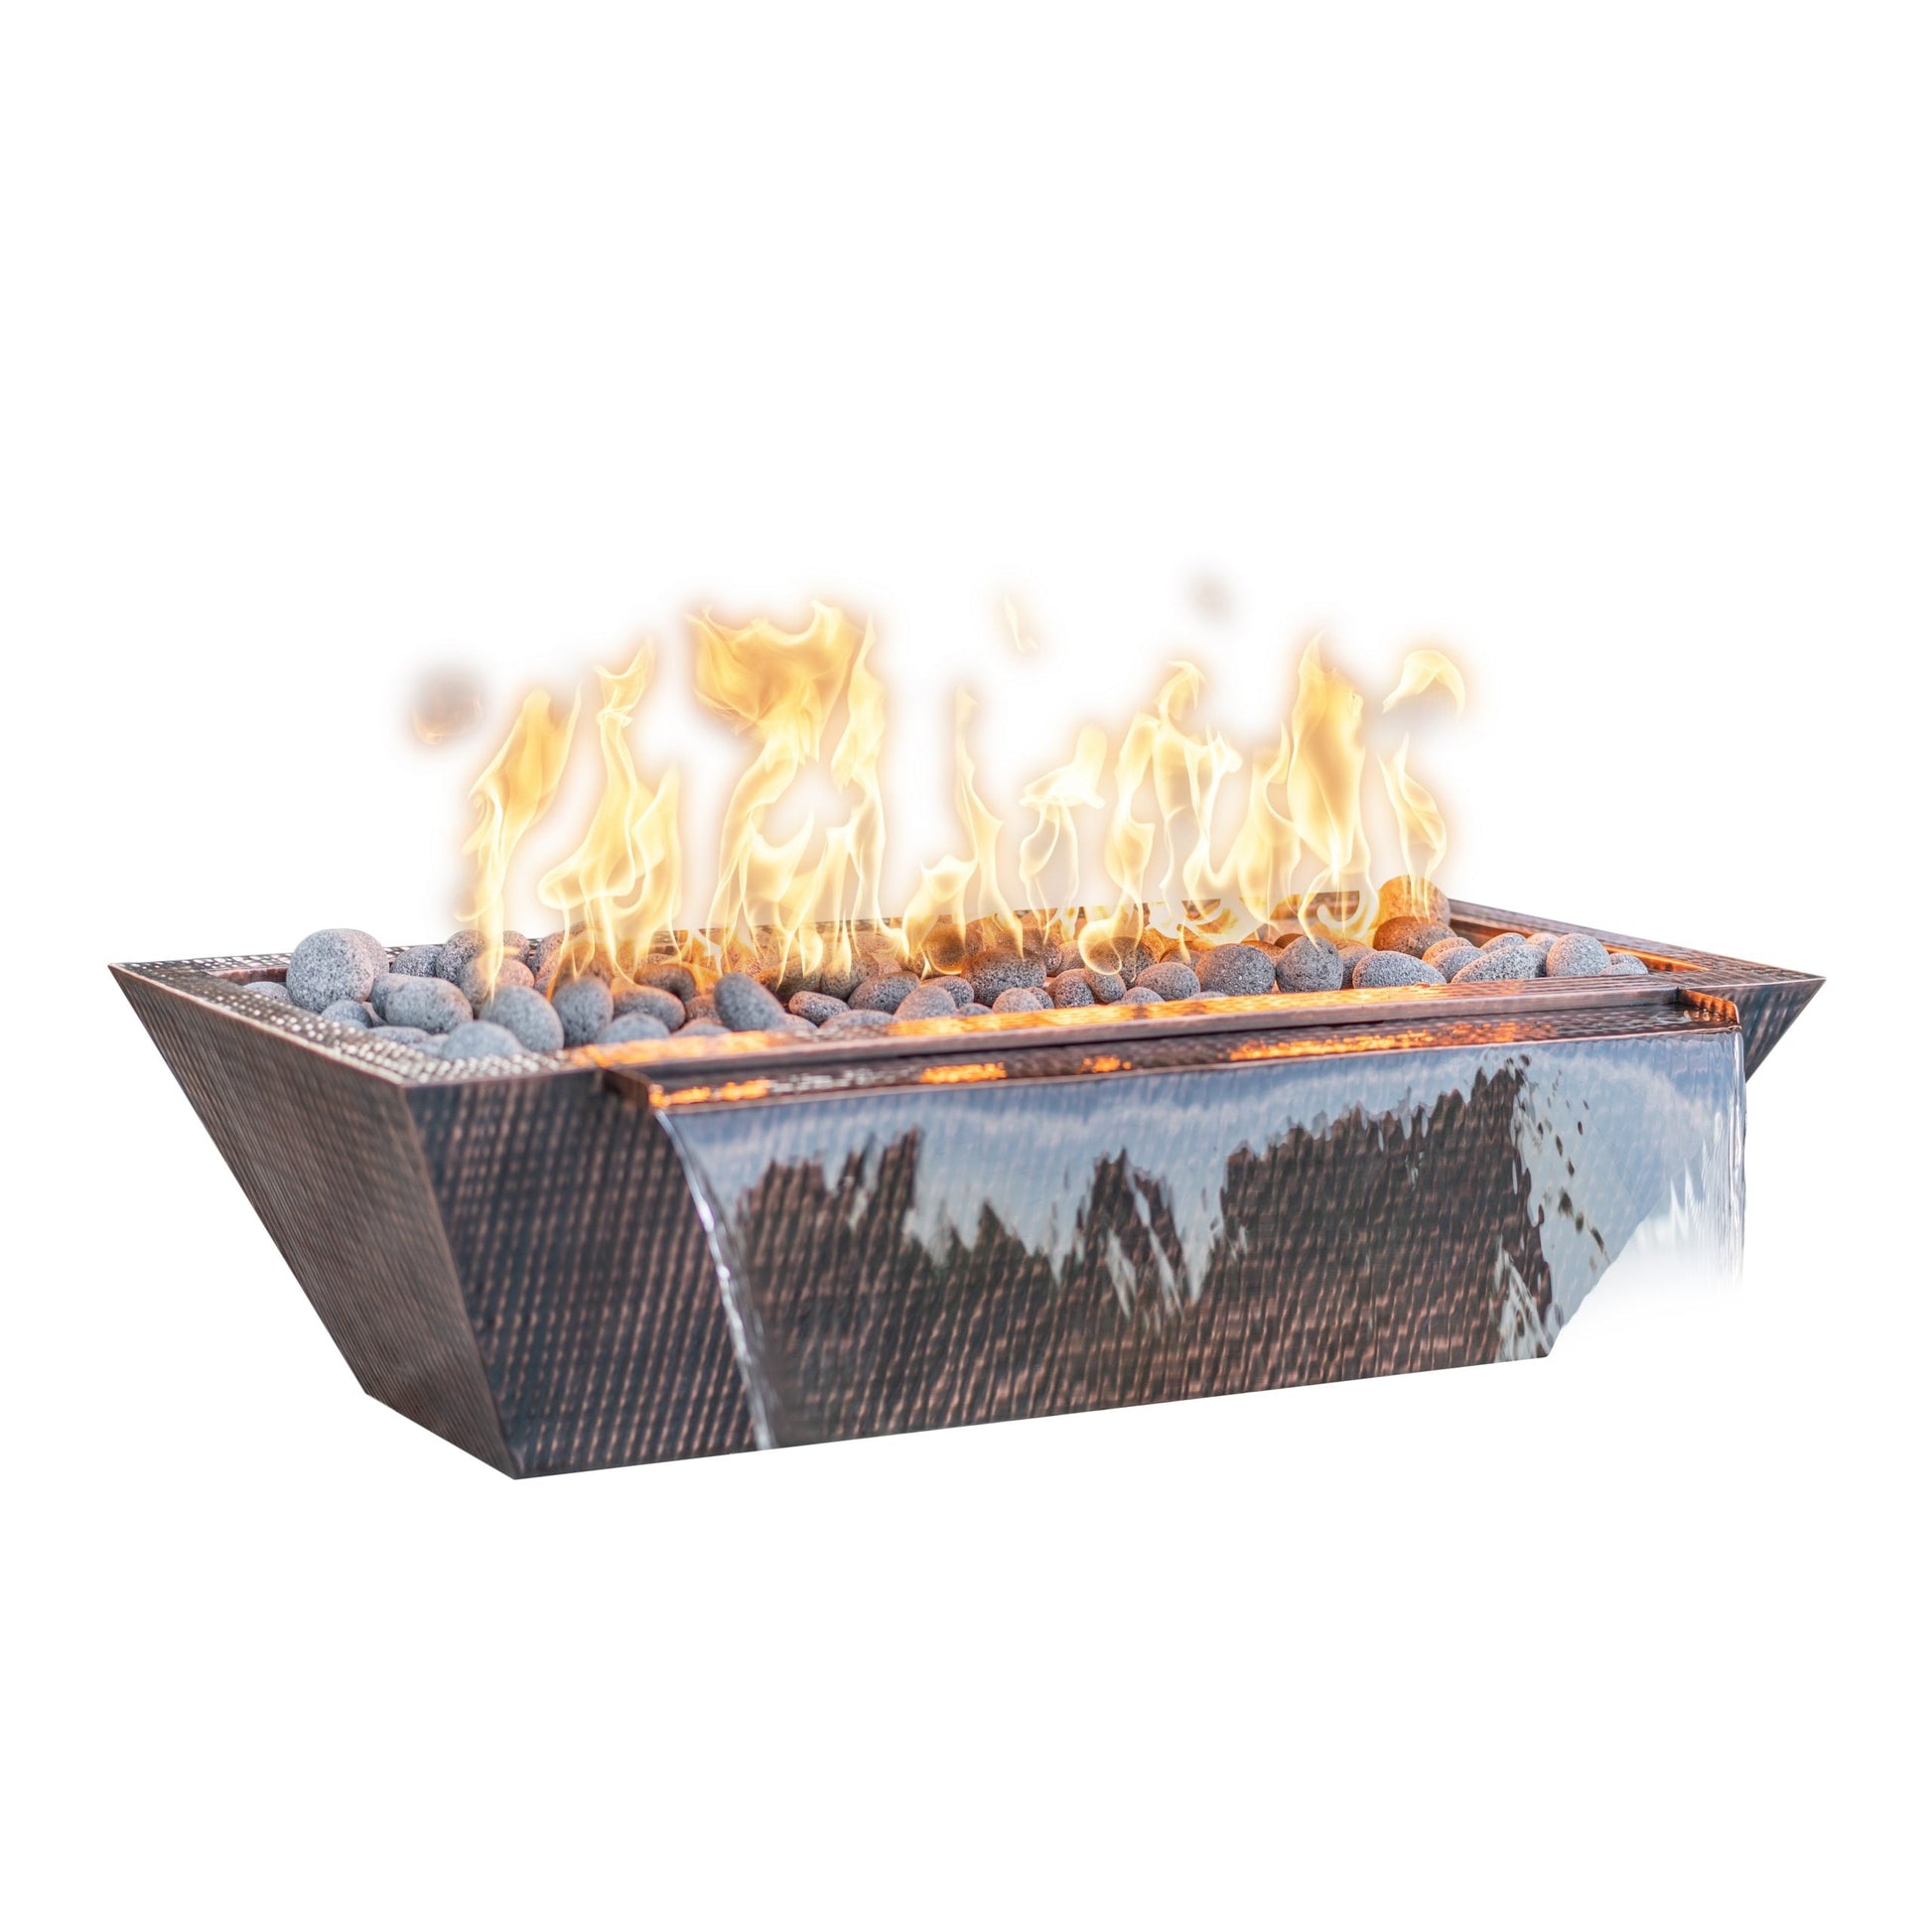 The Outdoor Plus Linear Maya 48" Stainless Steel Natural Gas Fire & Water Bowl with Match Lit Ignition